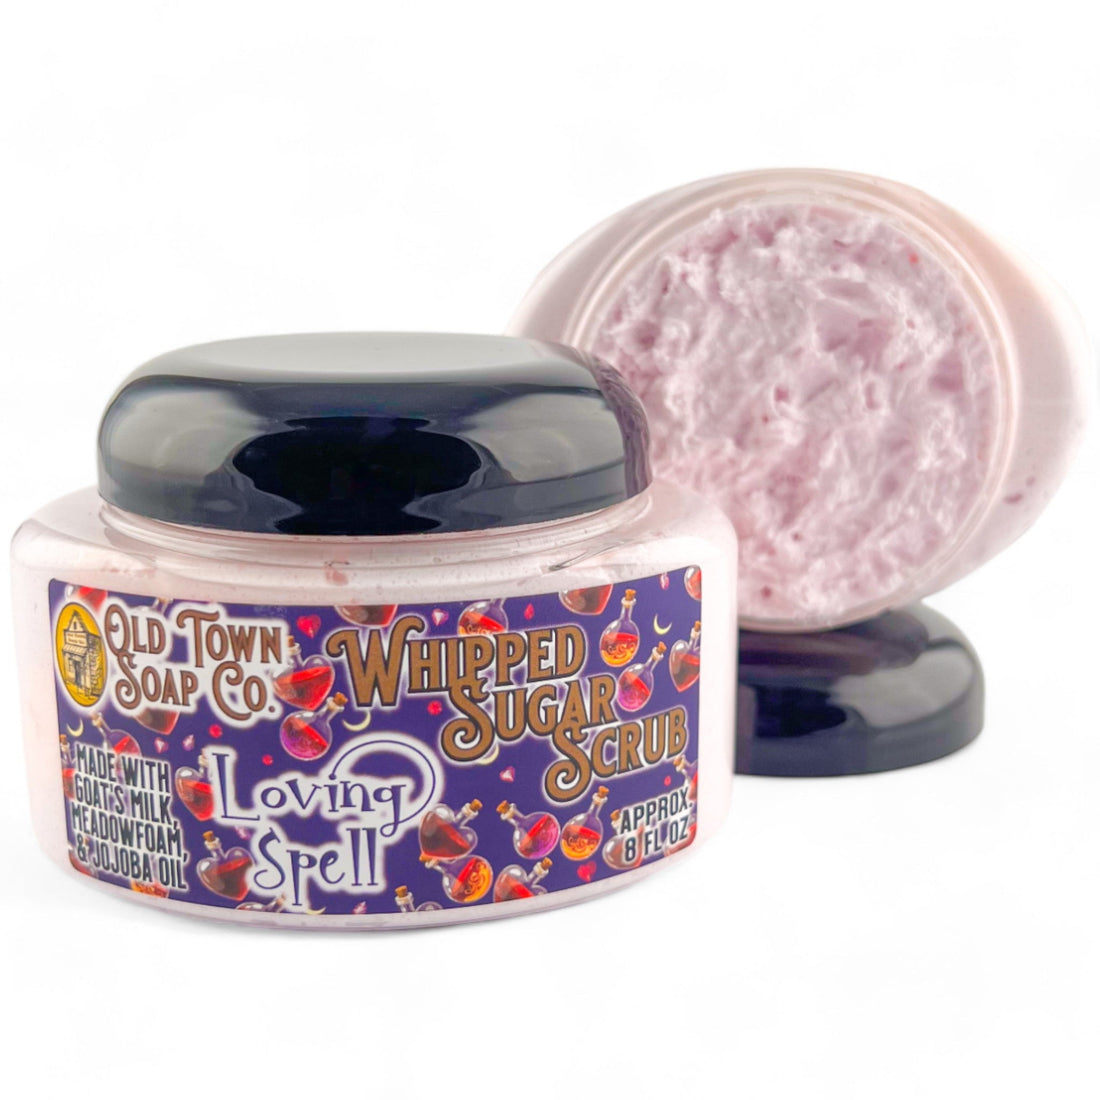 Loving Spell -Whipped Sugar Scrub Soap - Old Town Soap Co.